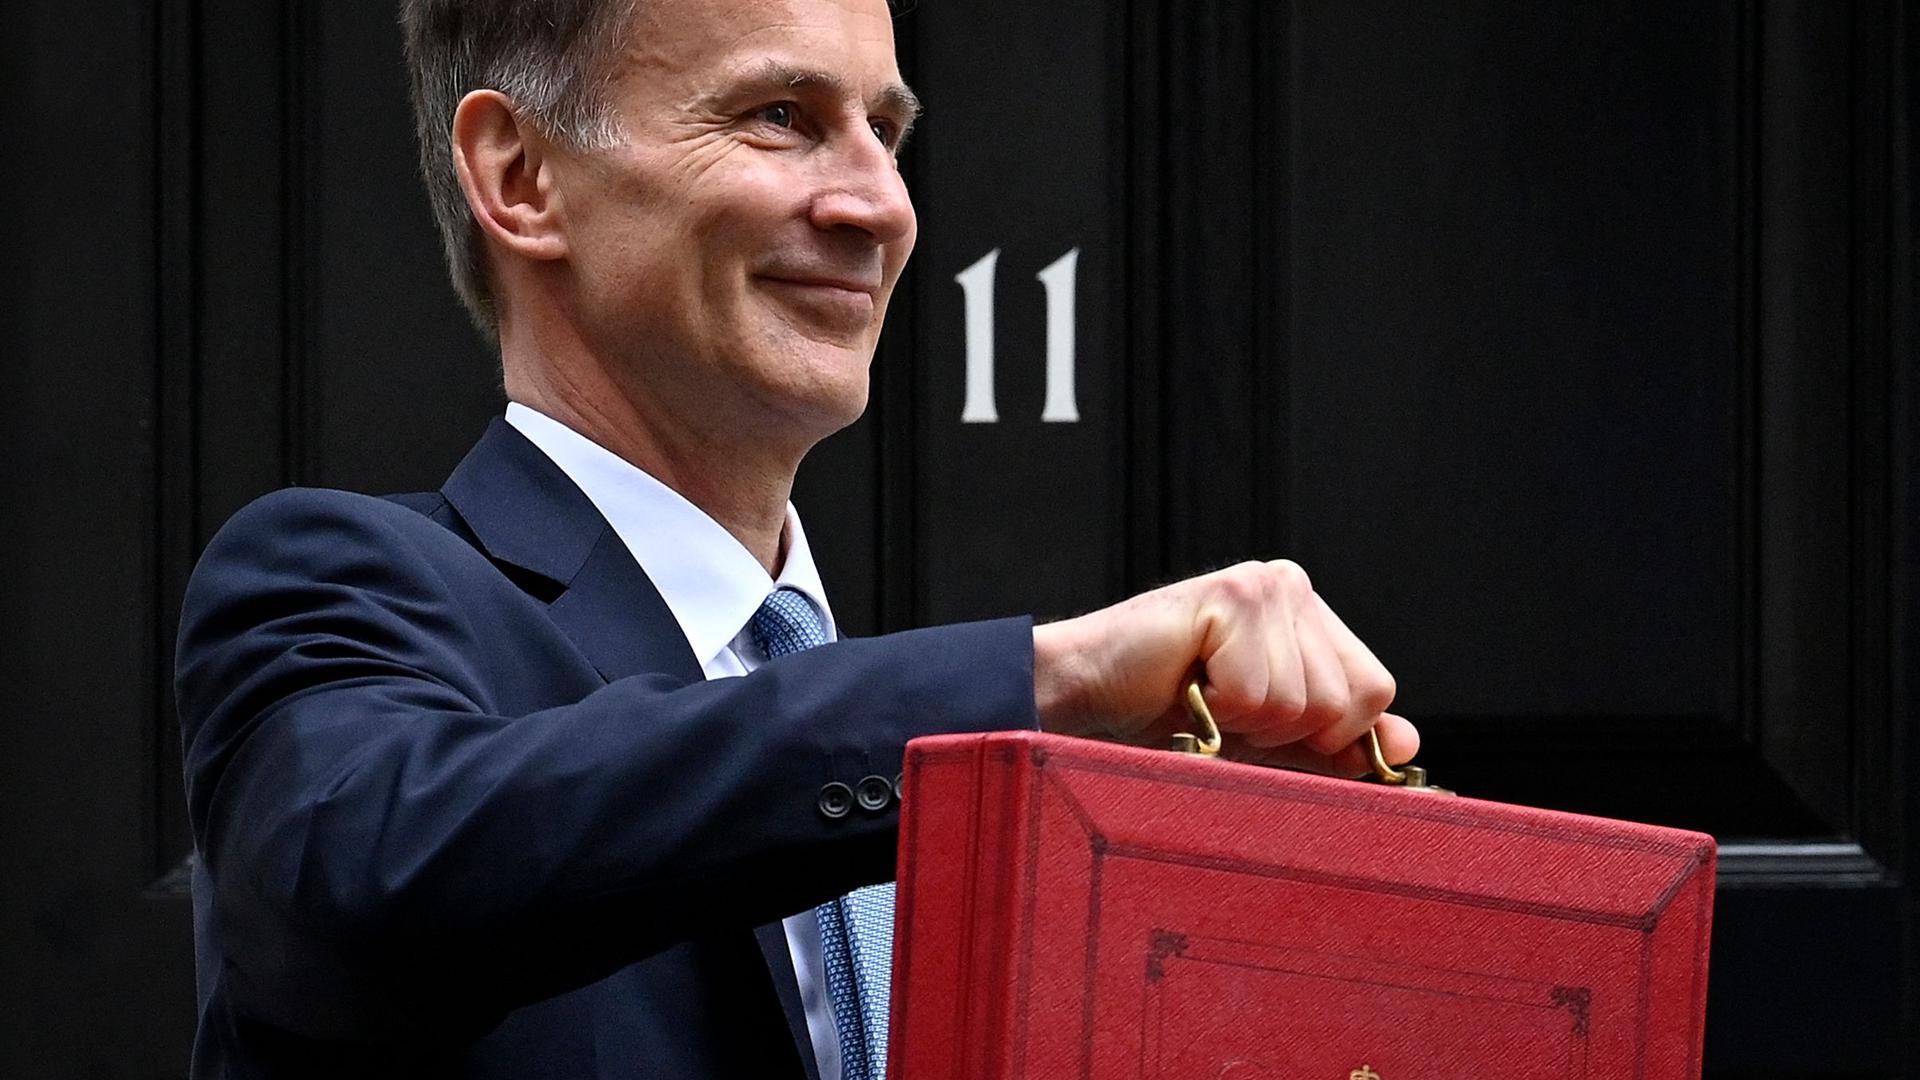 Chancellor of the Exchequer Jeremy Hunt poses with the red Budget Box as he leaves 11 Downing Street